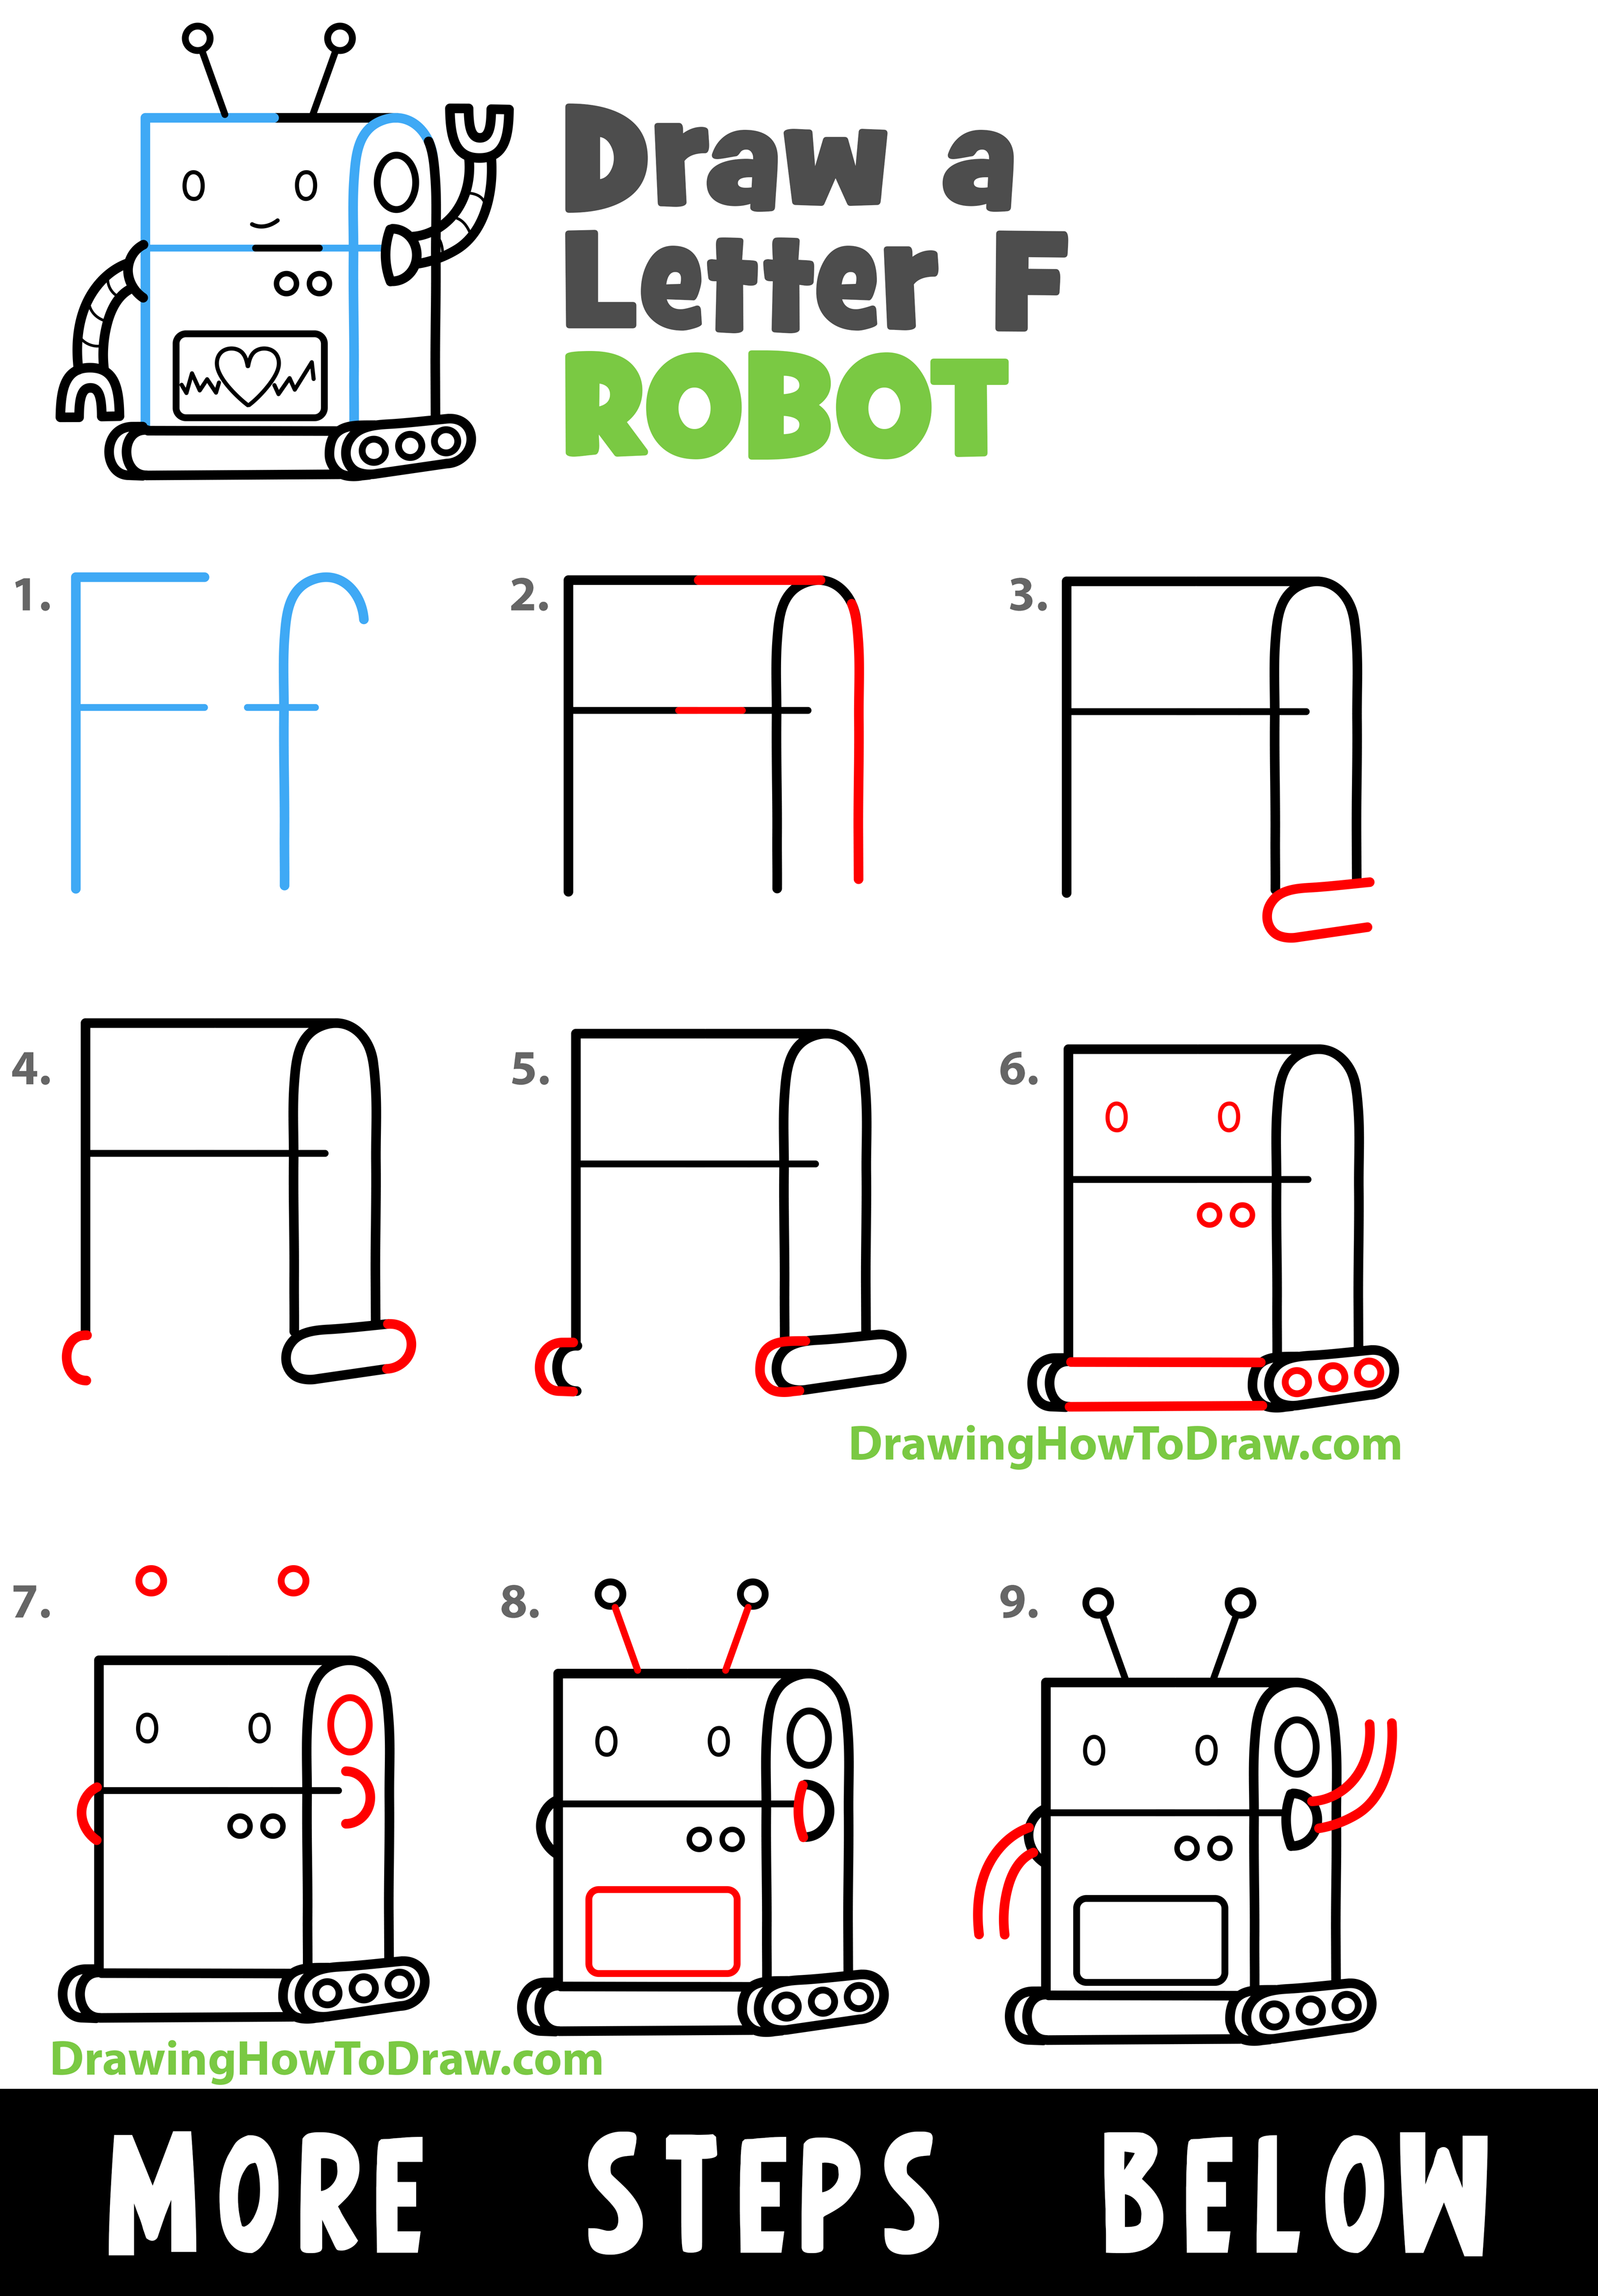 How to Draw a Cartoon Robot with Letter Ff Shapes - Easy Step-by-Step Drawing Tutorial for Kids